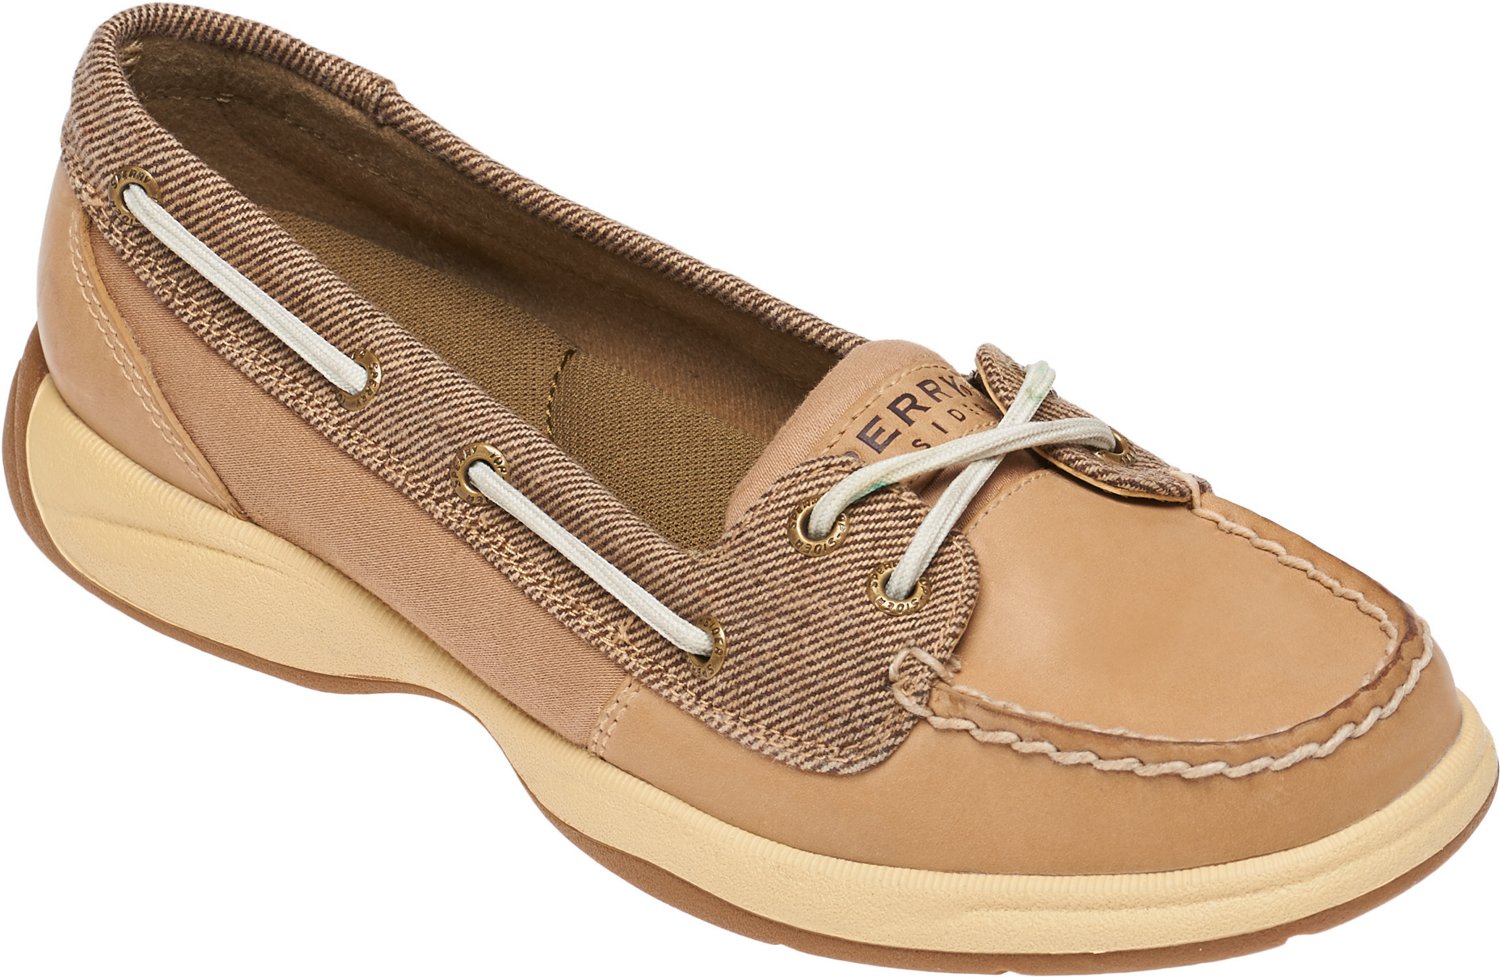 academy women's sperry shoes